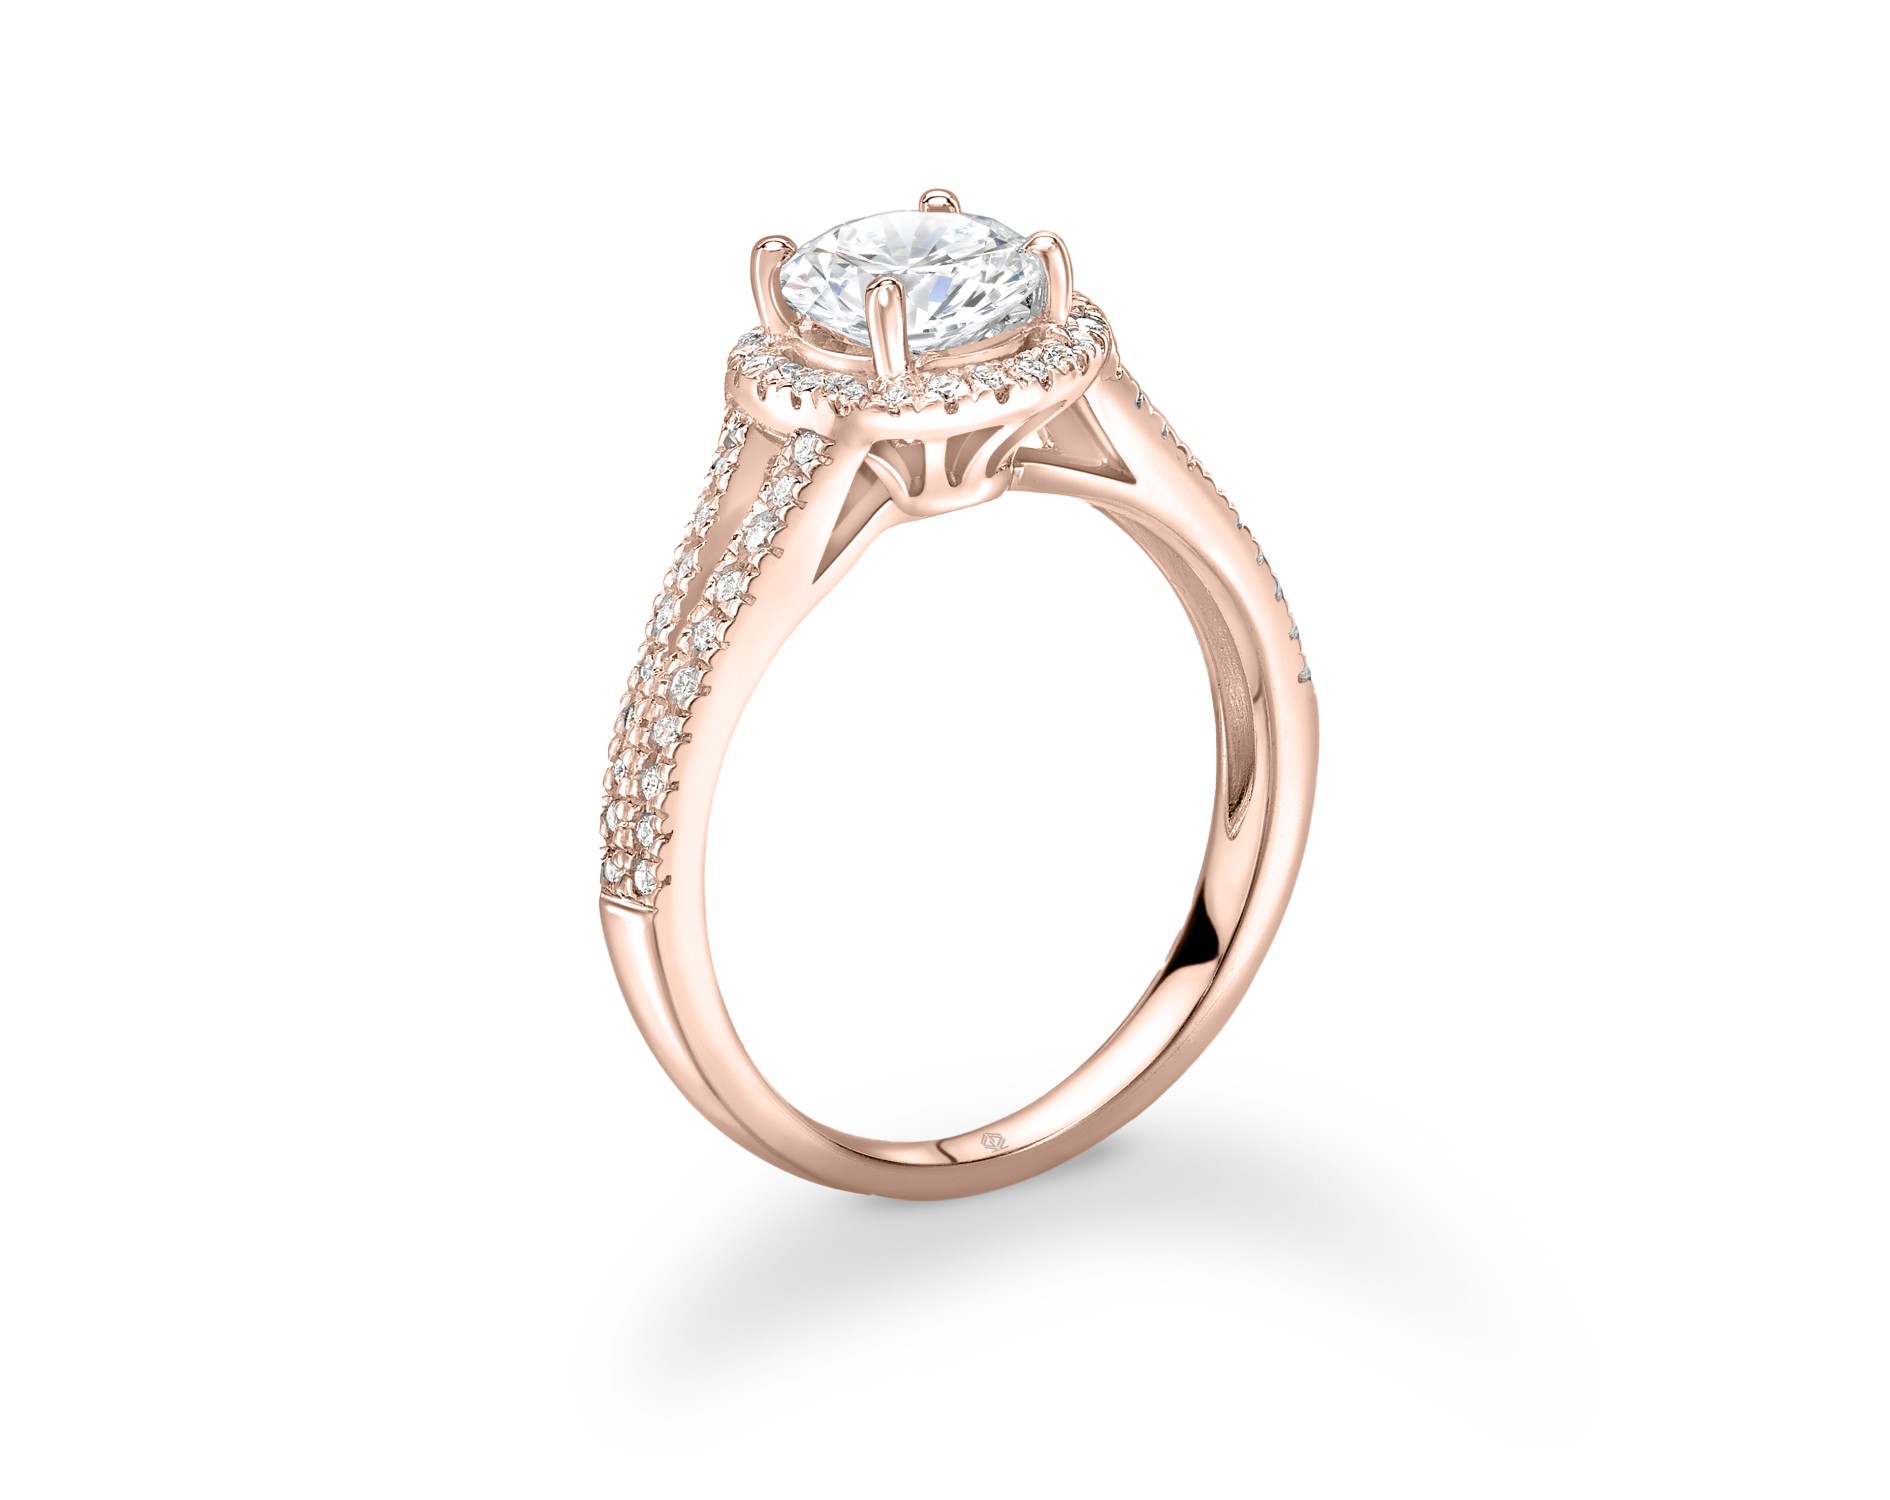 18K ROSE GOLD HALO DIAMOND ENGAGEMENT RING WITH SPLIT SHANKS IN PAVE SET